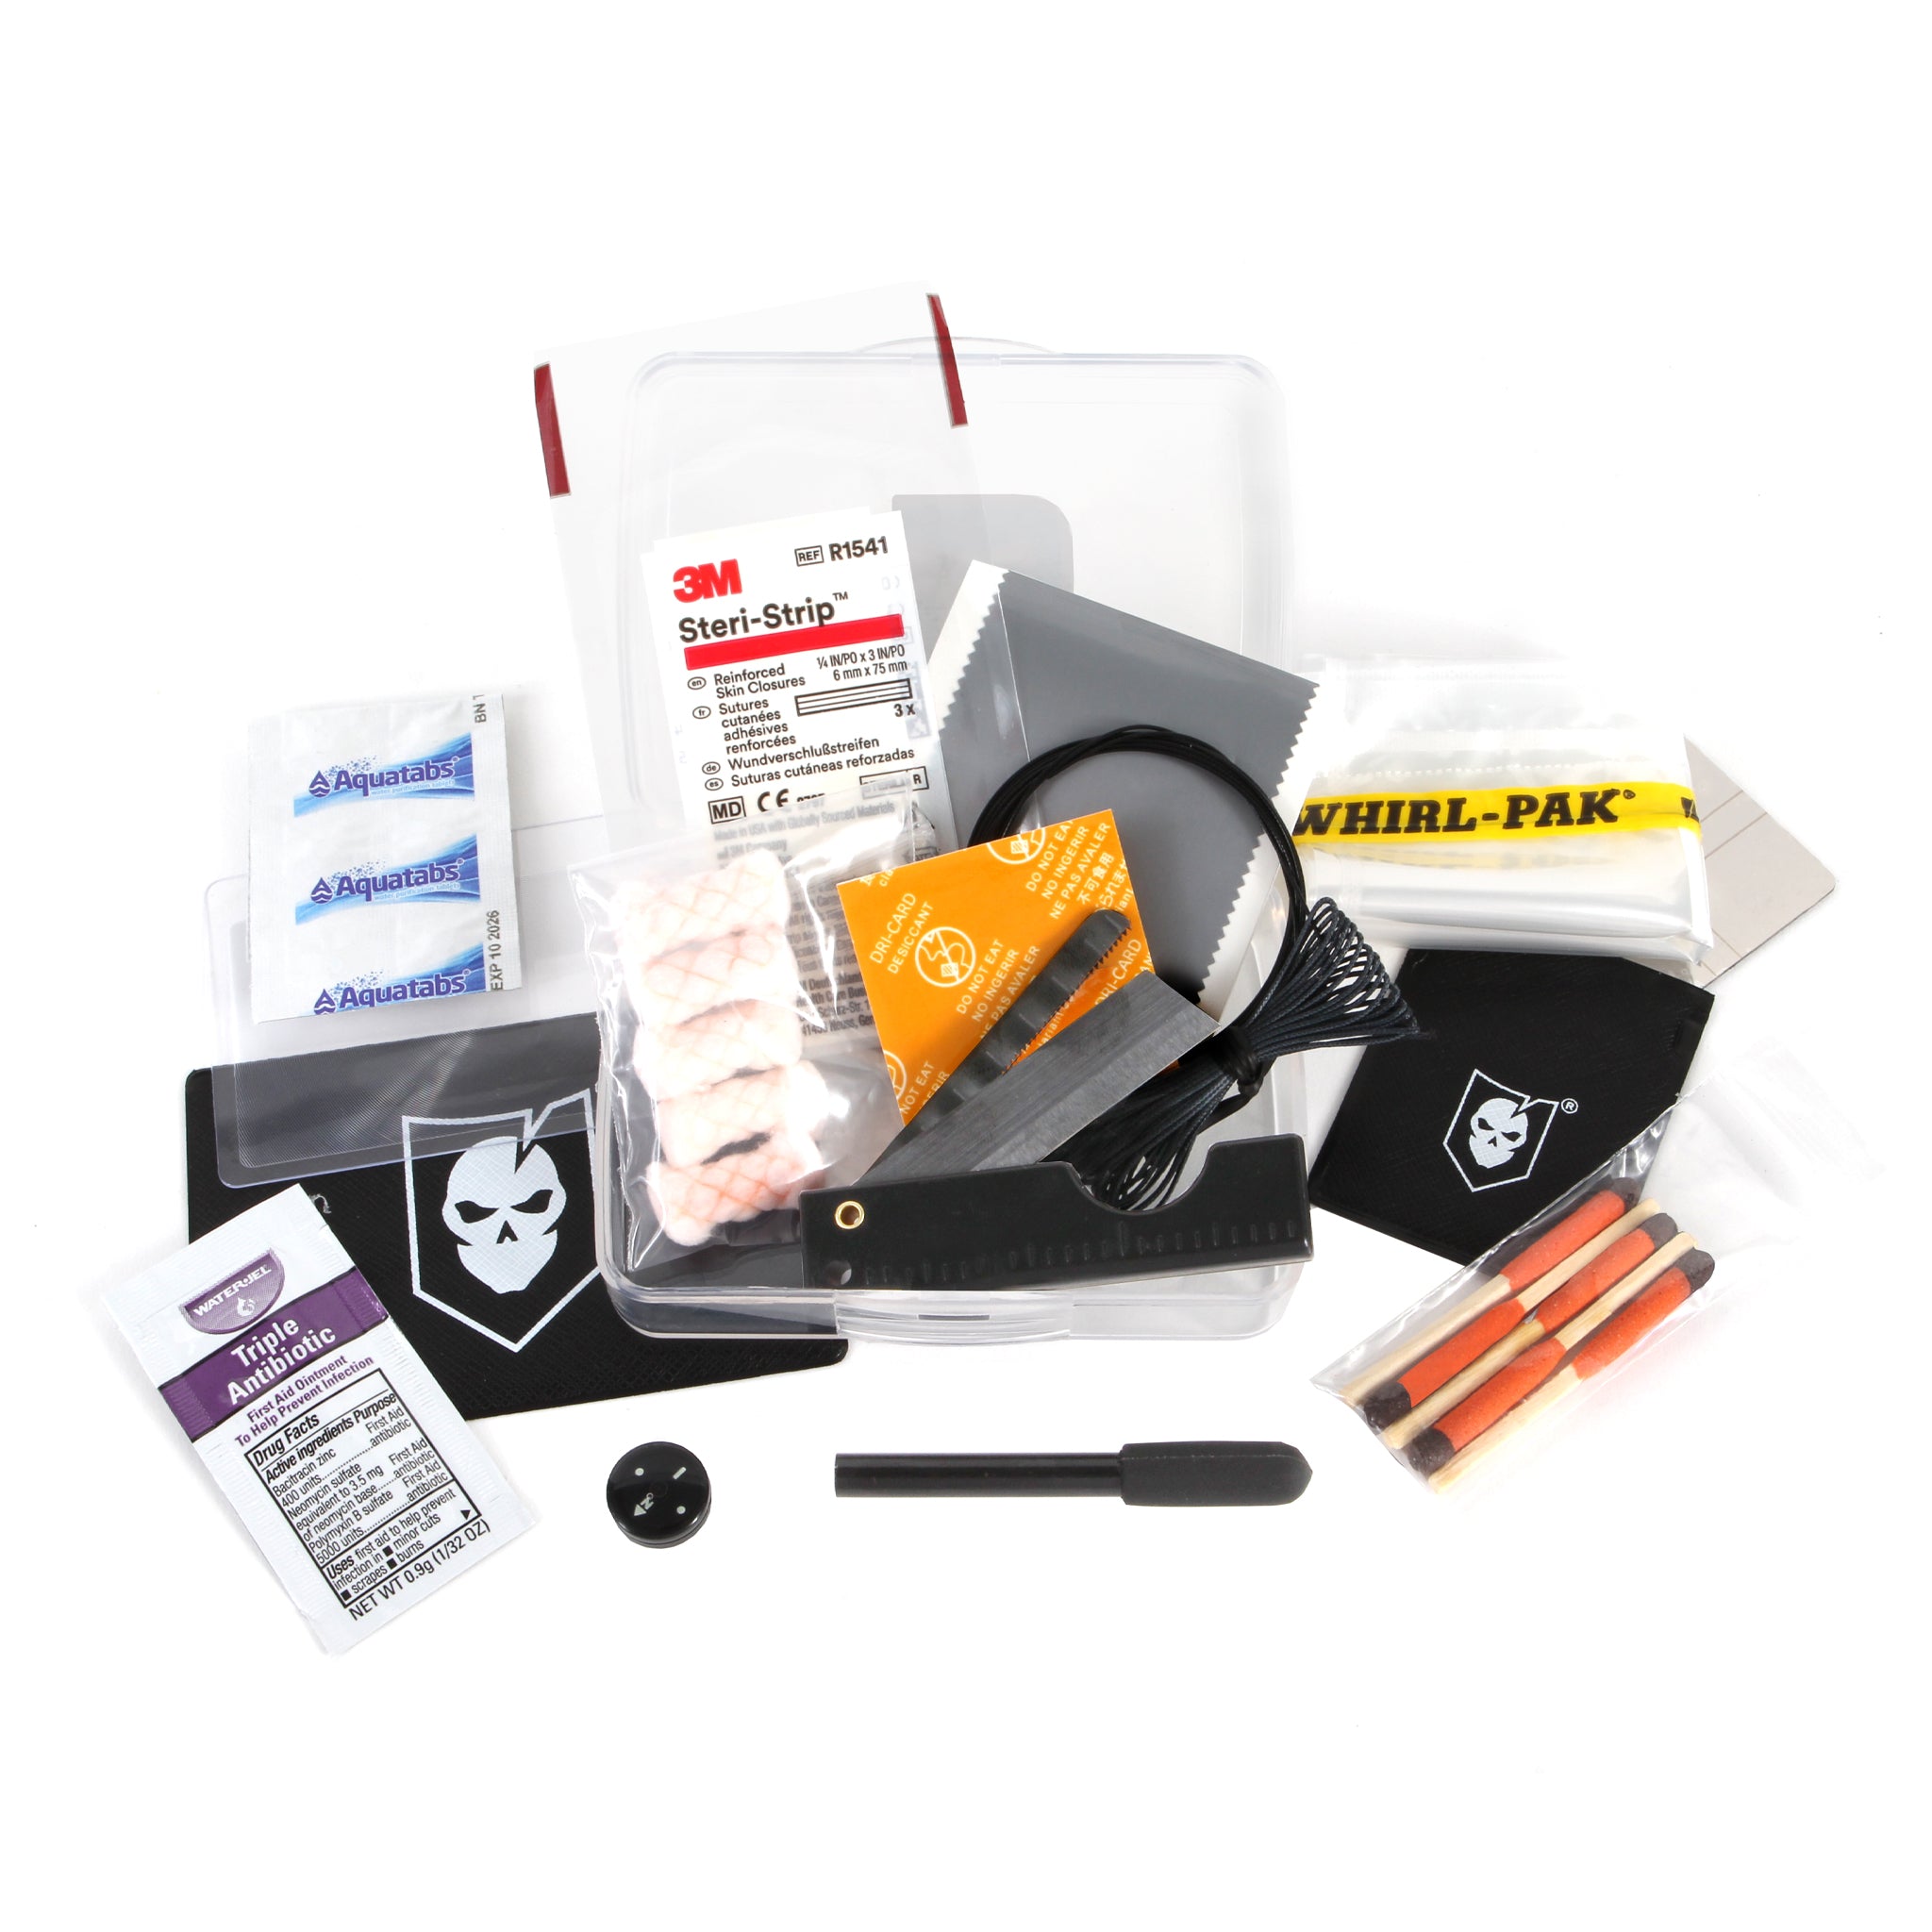 langs opening heilig ITS Mini Survival Kit (MSK) - ITS Tactical